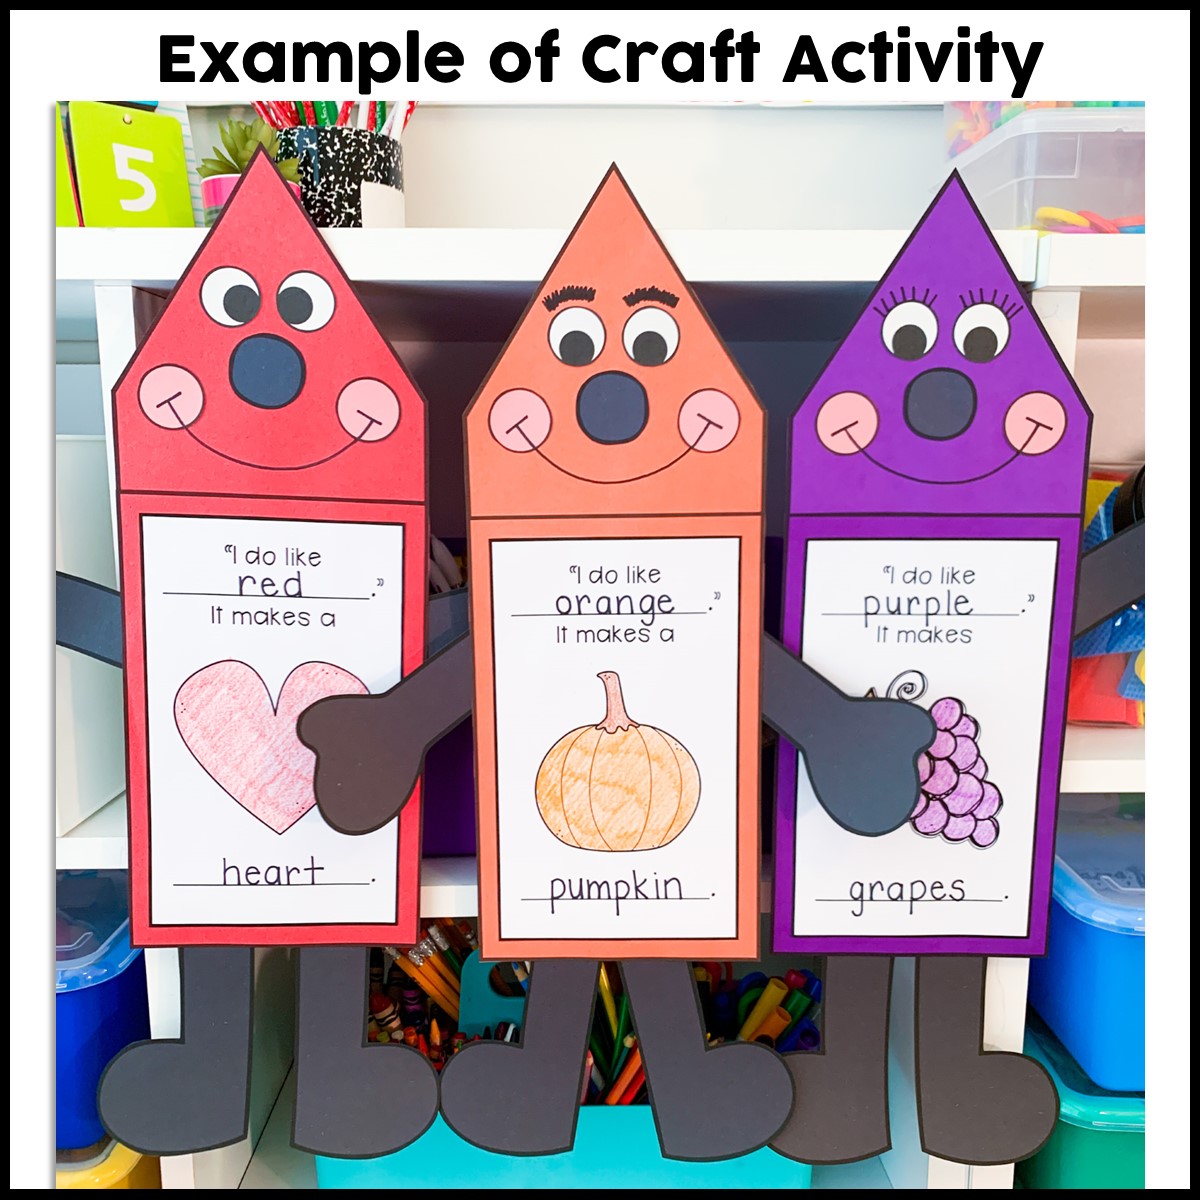 Interactive Crafts & Activities for The Crayon Box That Talked